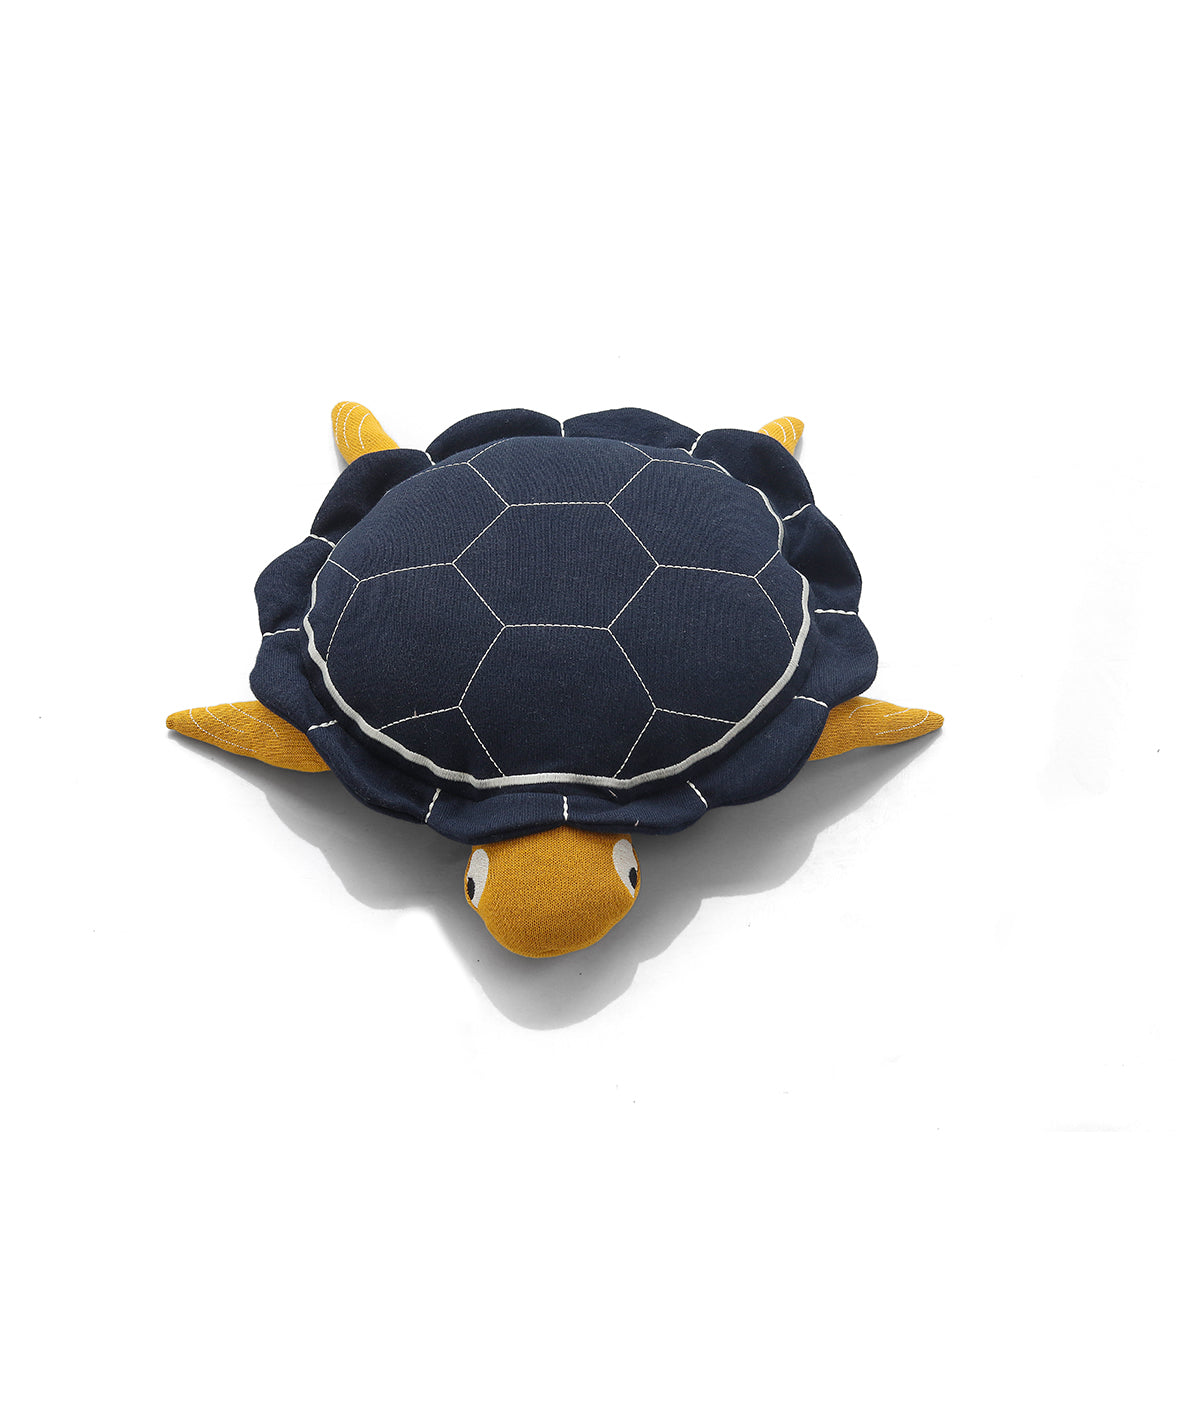 Mack The Tortoise - Cotton Knitted Stuffed Pillow for Babies (Navy Blue)